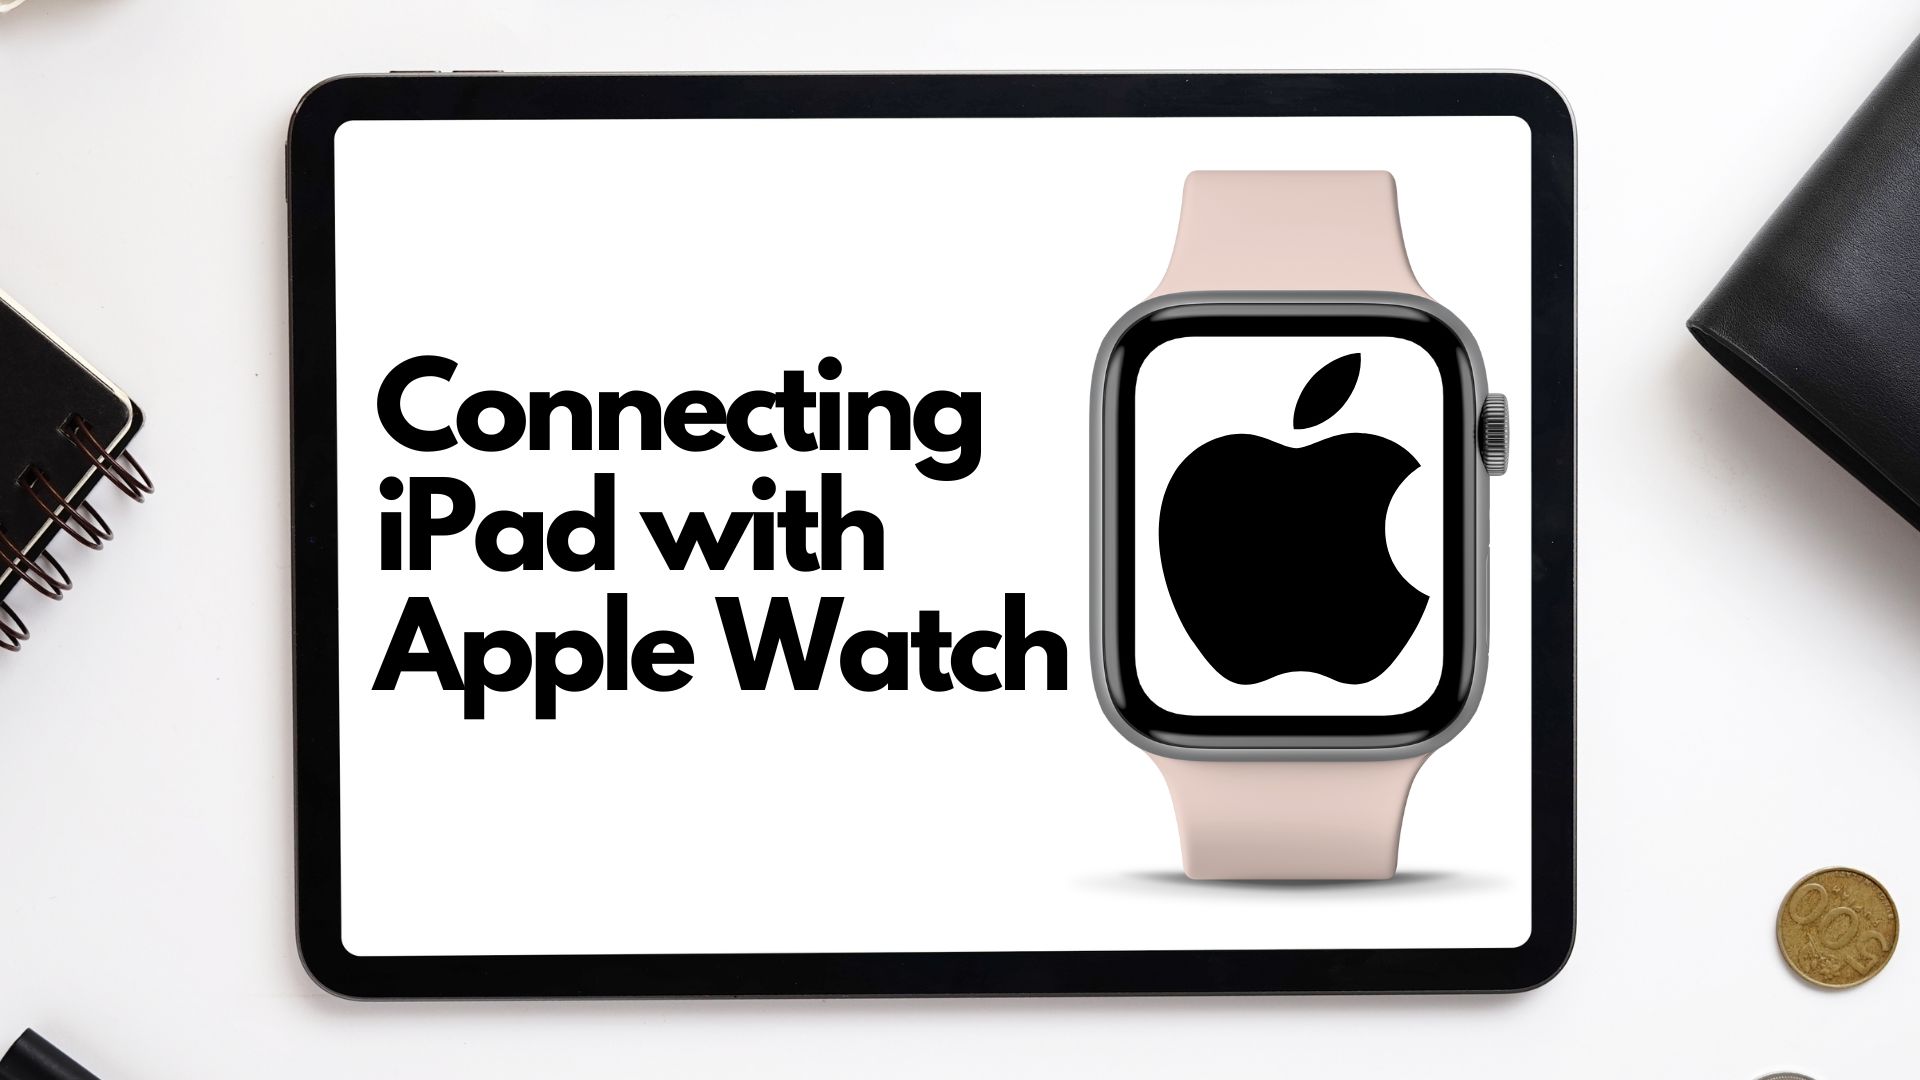 Can I connect an Apple Watch to an iPad